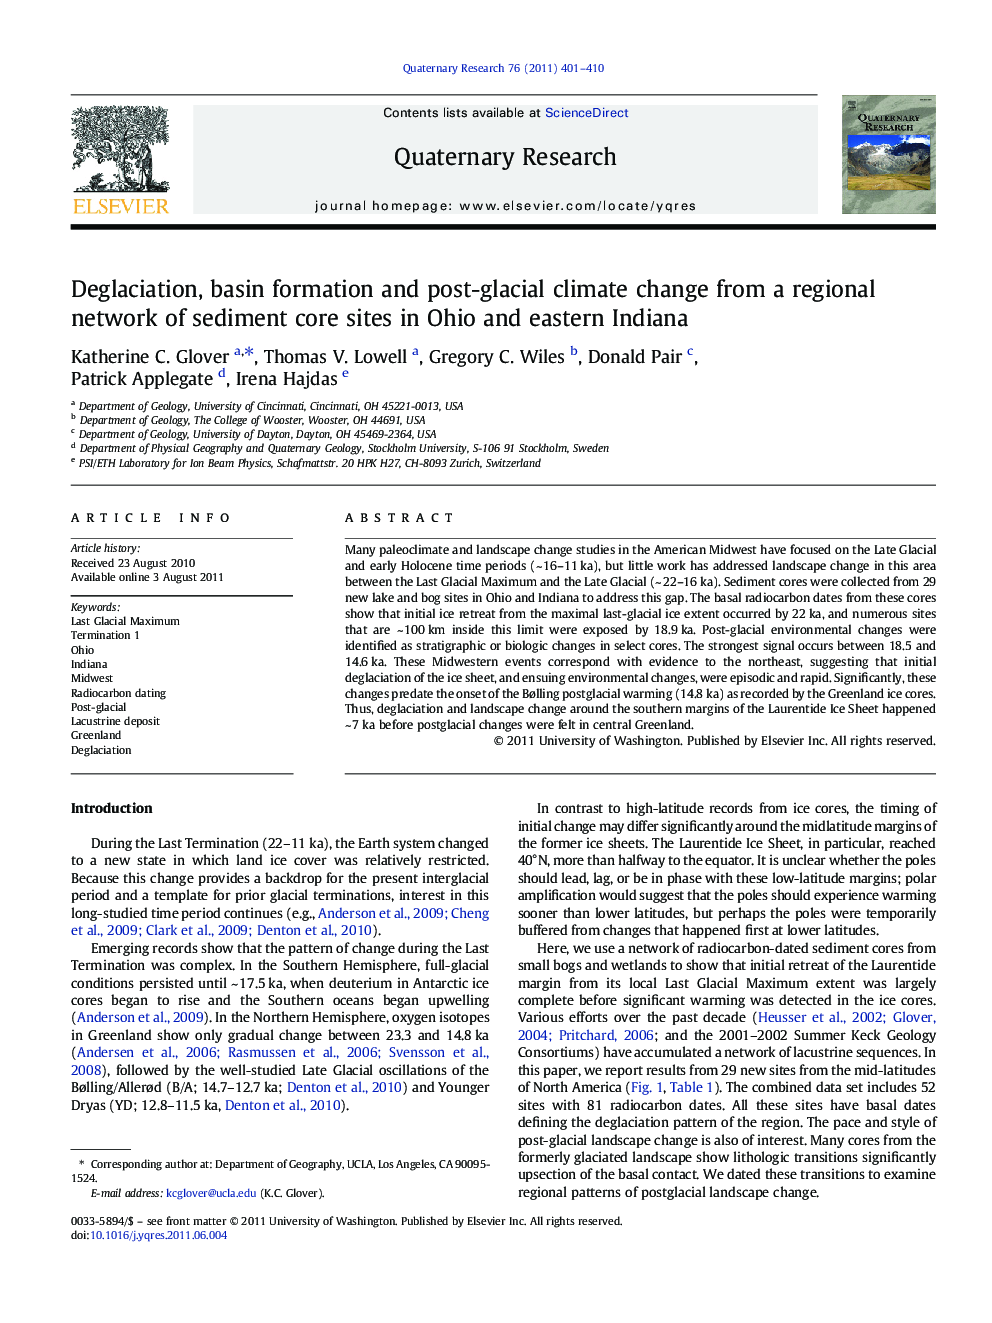 Deglaciation, basin formation and post-glacial climate change from a regional network of sediment core sites in Ohio and eastern Indiana